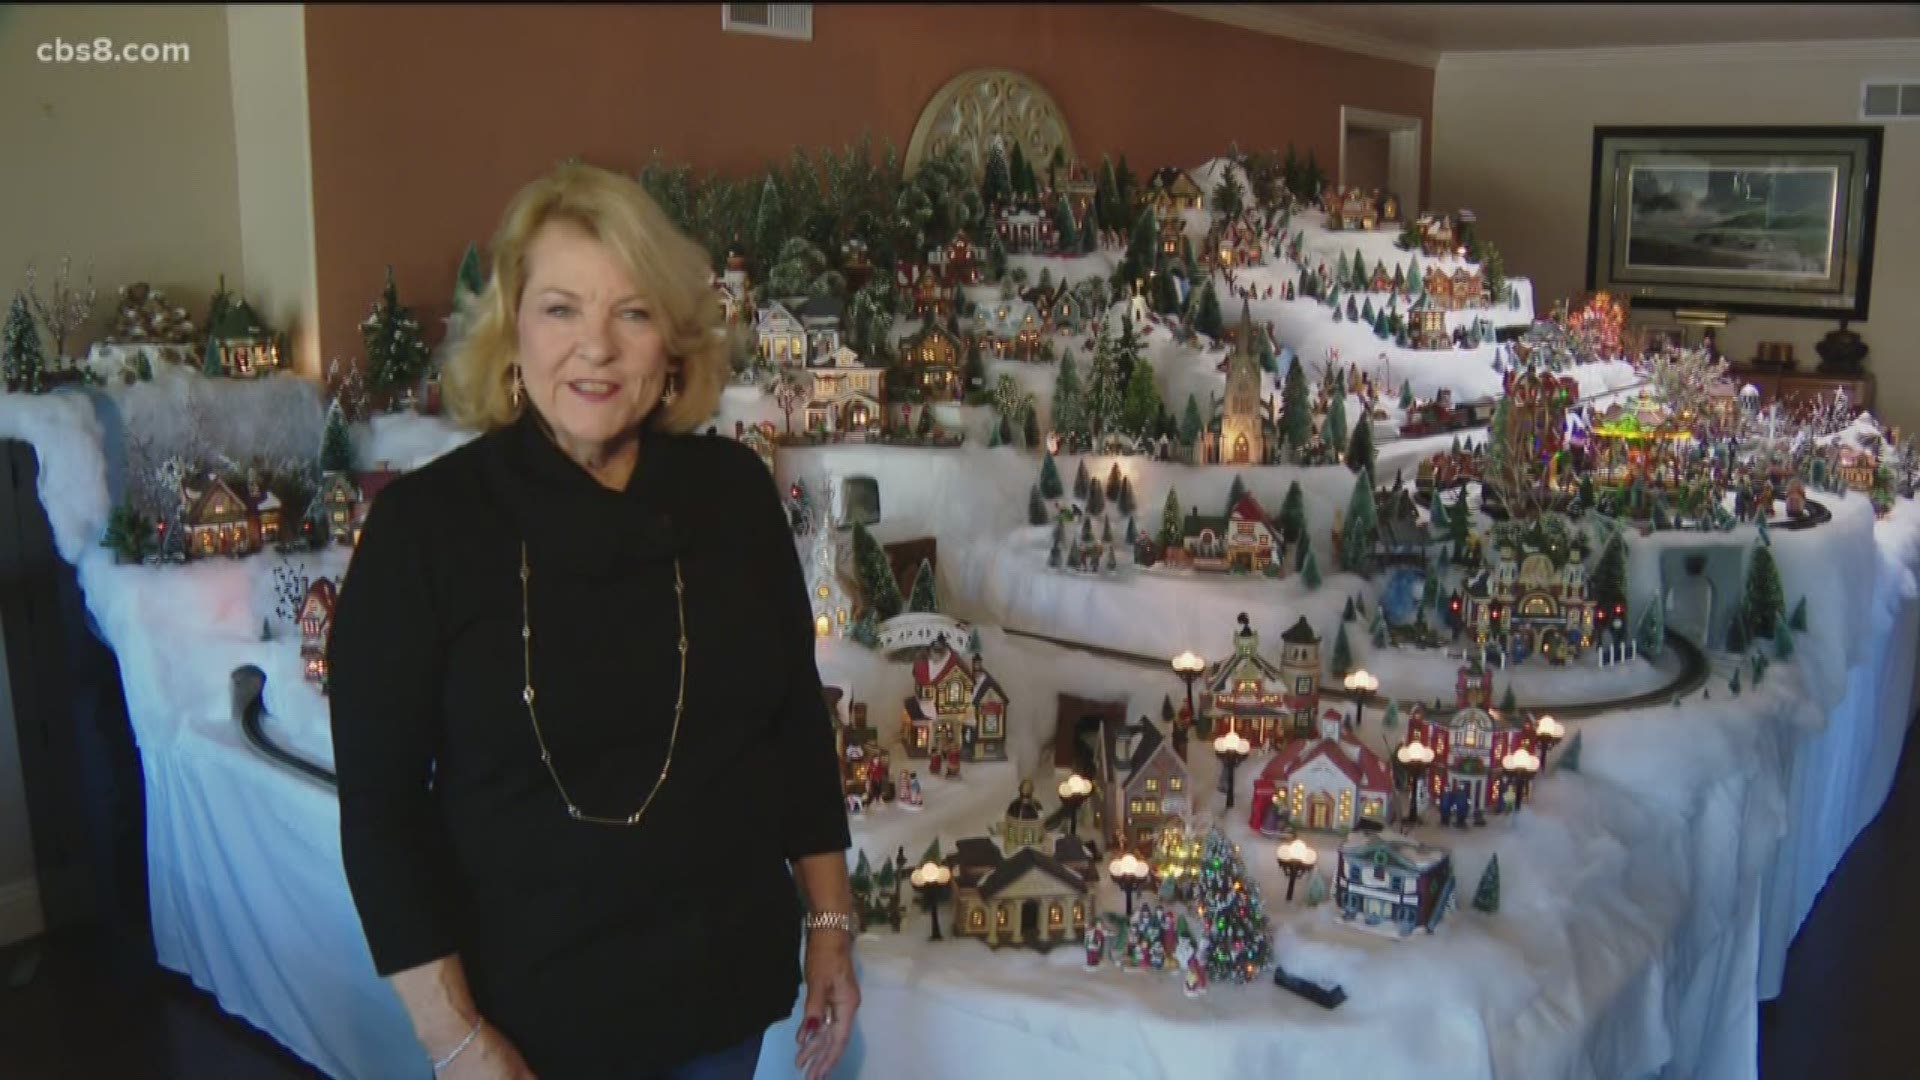 News 8 takes you to San Carlos for a holiday tradition that is 35 years in the making. Gail Carson has been crafting and growing her Christmas village for decades.